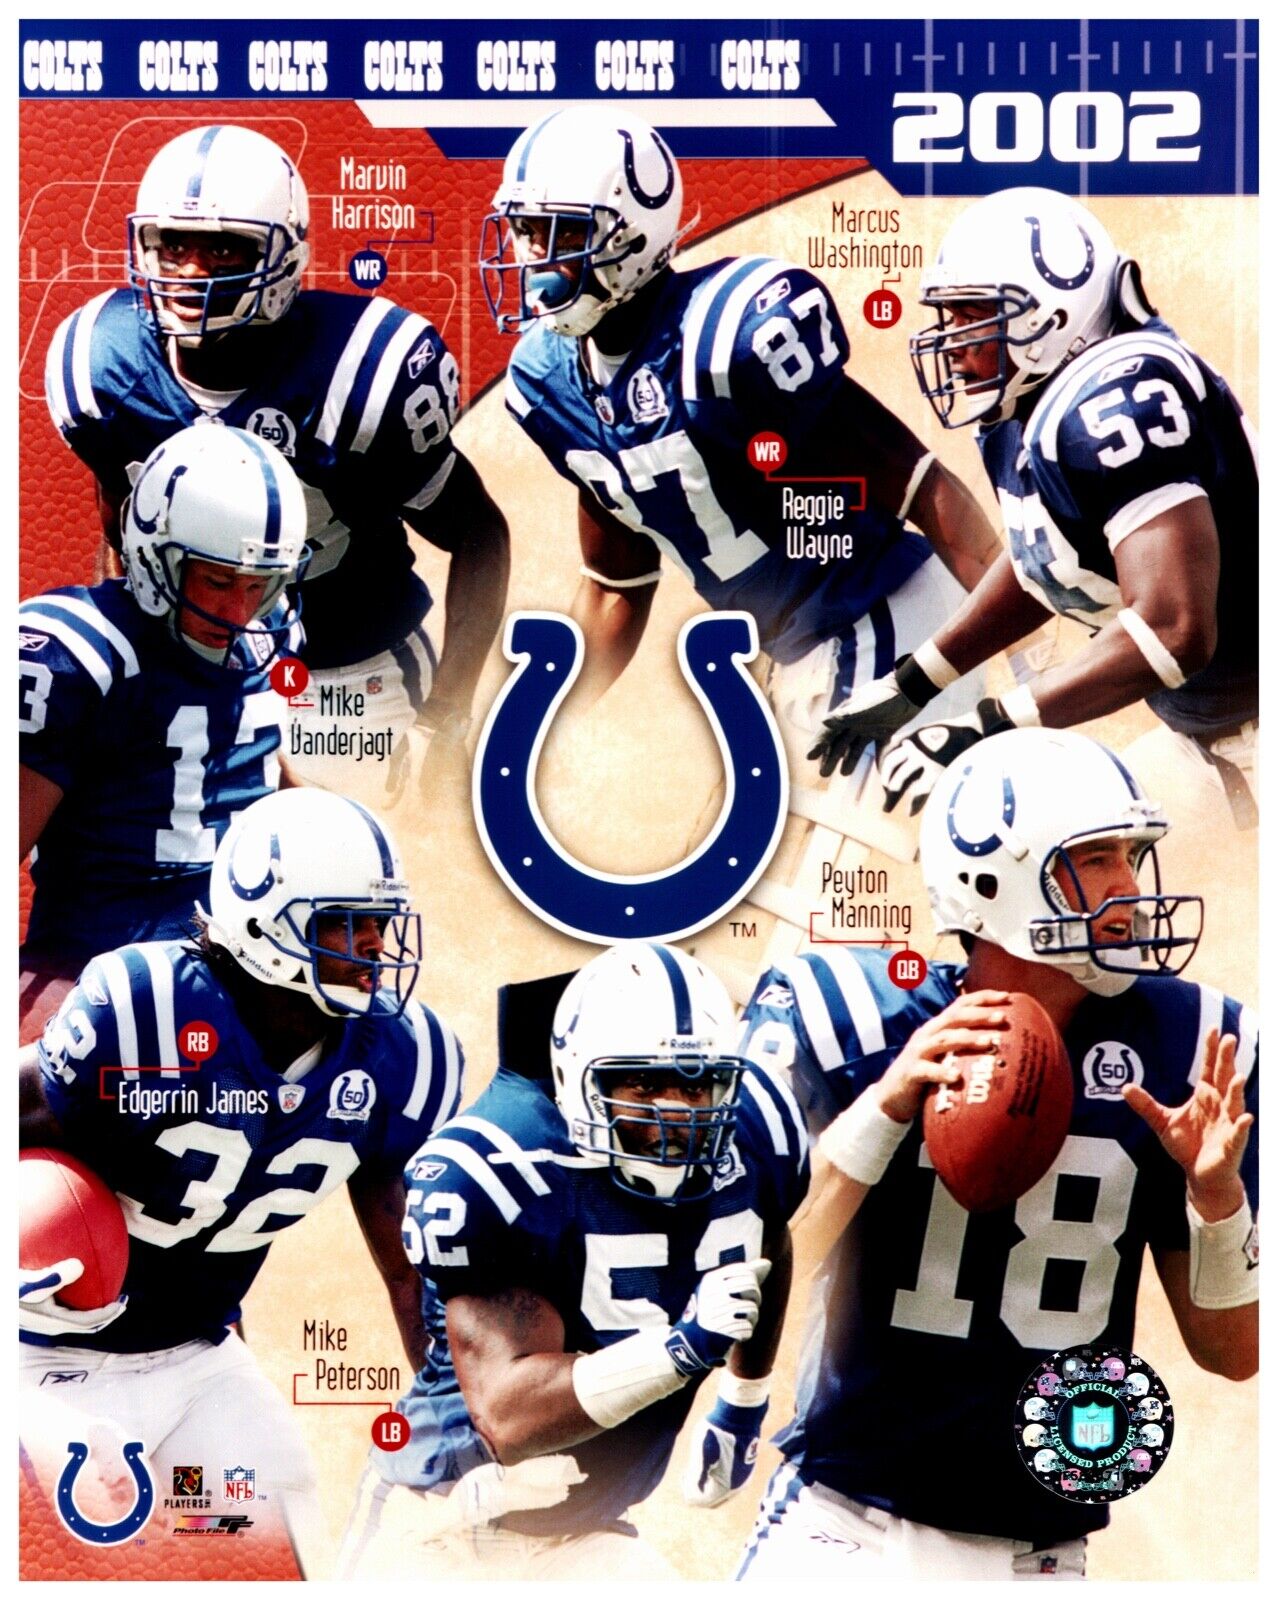 2002 Indianapolis Colts Team Composite Unsigned Photo File 8x10 Hologram Photo